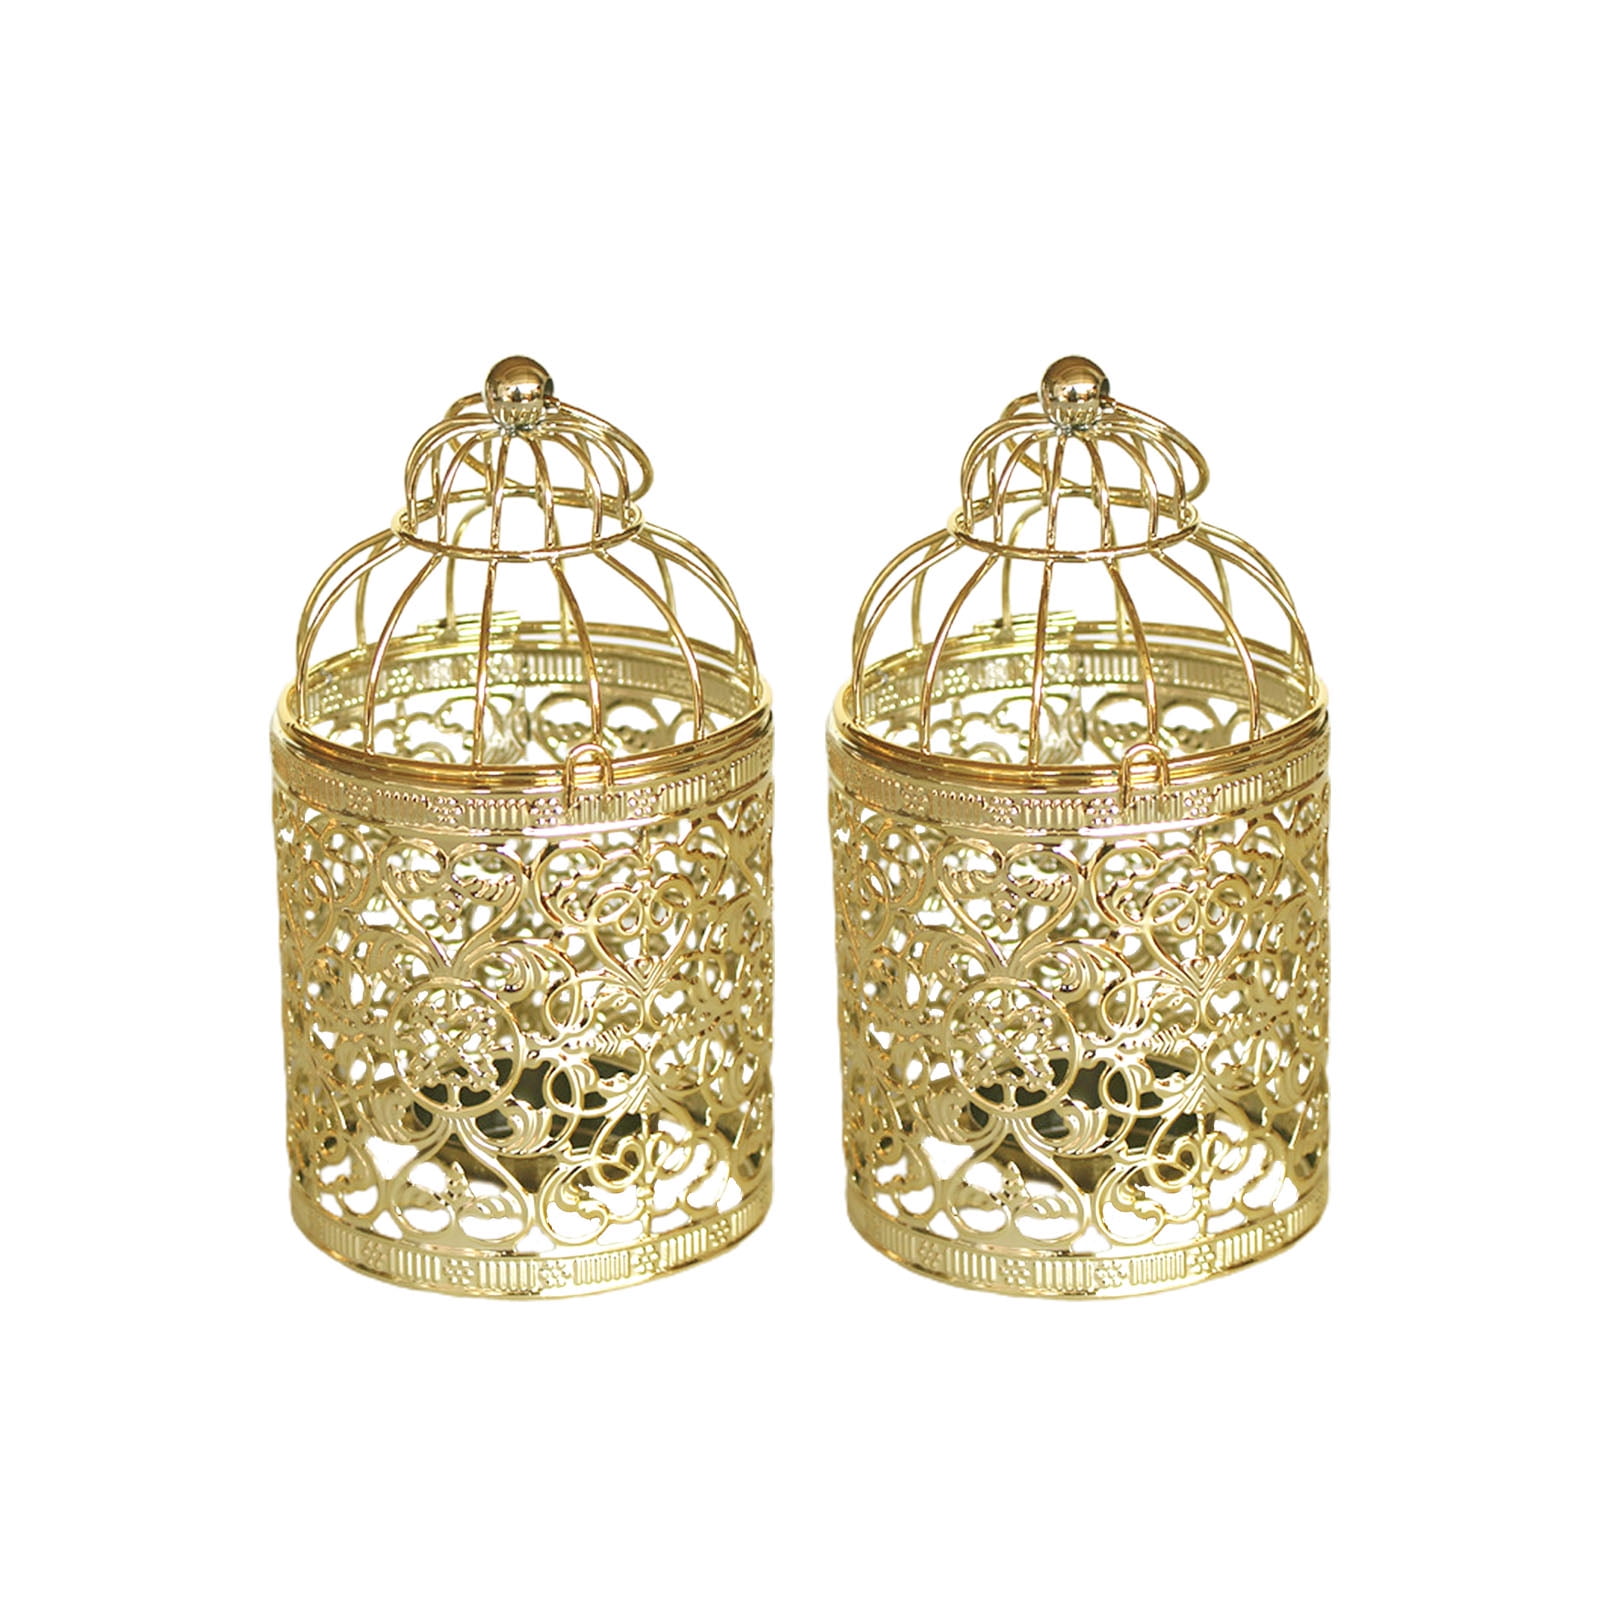 Hollow Candle Holder Candlestick Tealight Hanging Lantern Bird Cage Wrought 